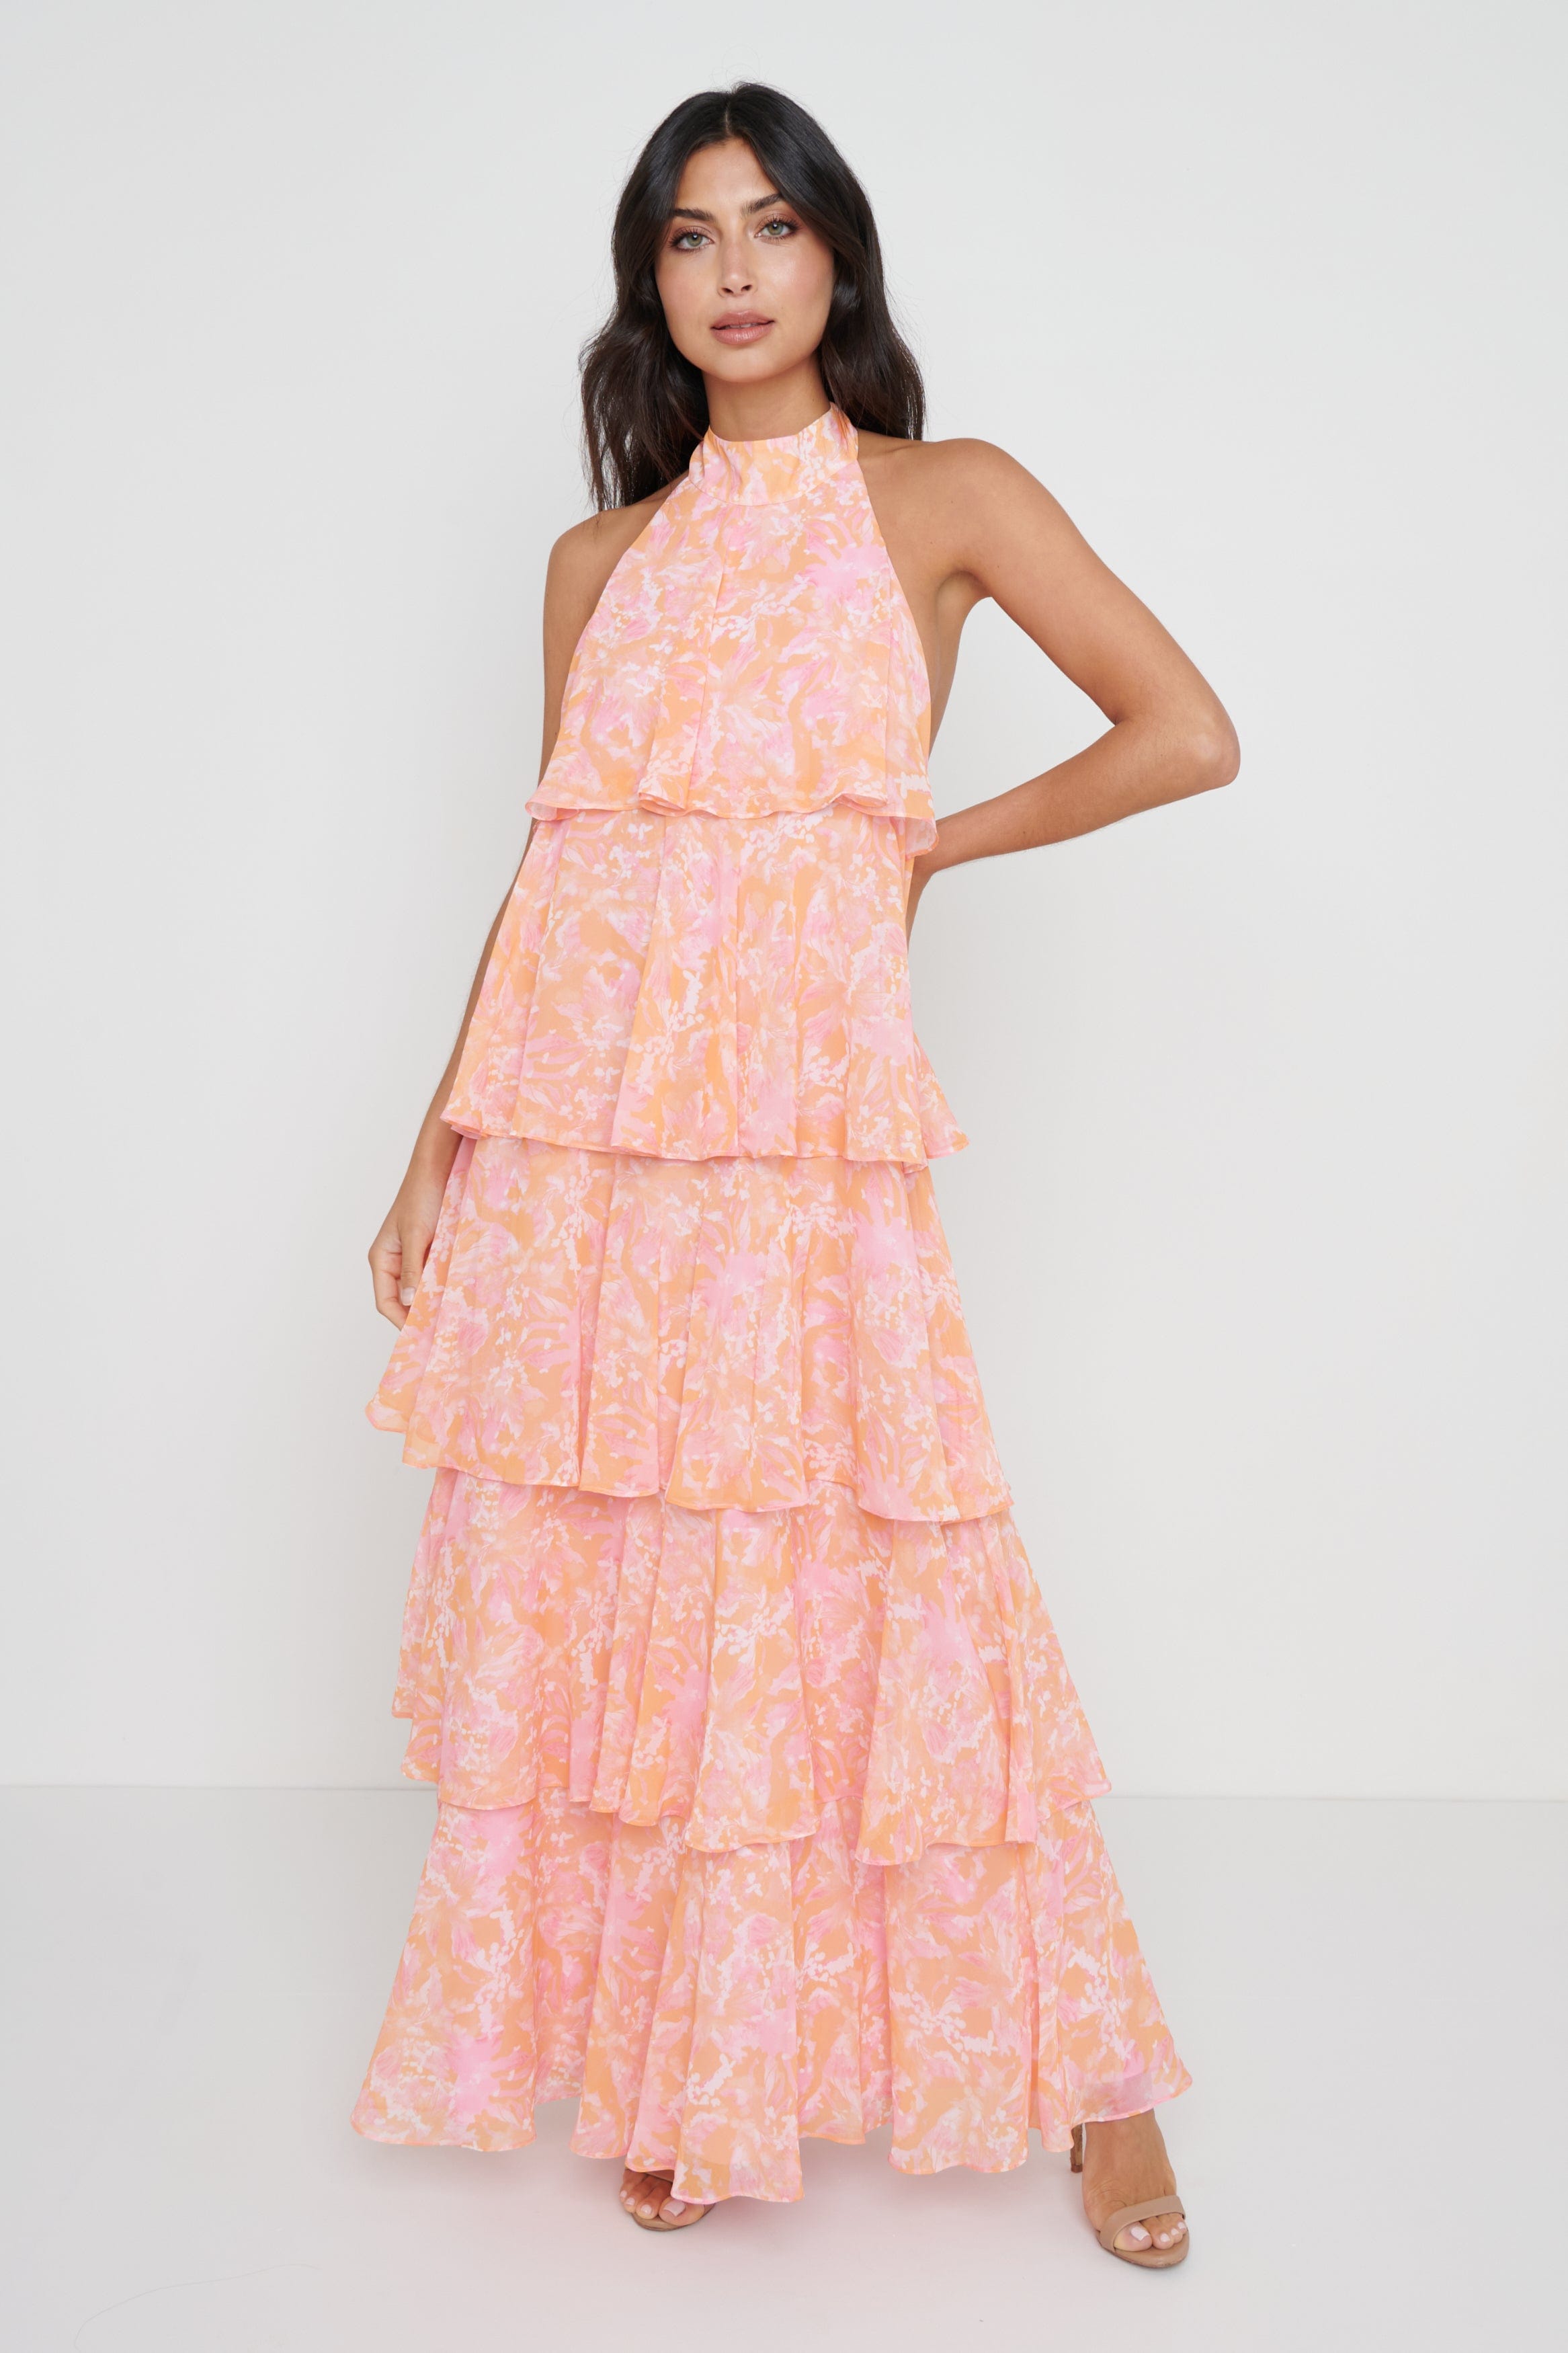 Thea Halter Neck Ruffle Dress - Pink and Orange Floral, 12